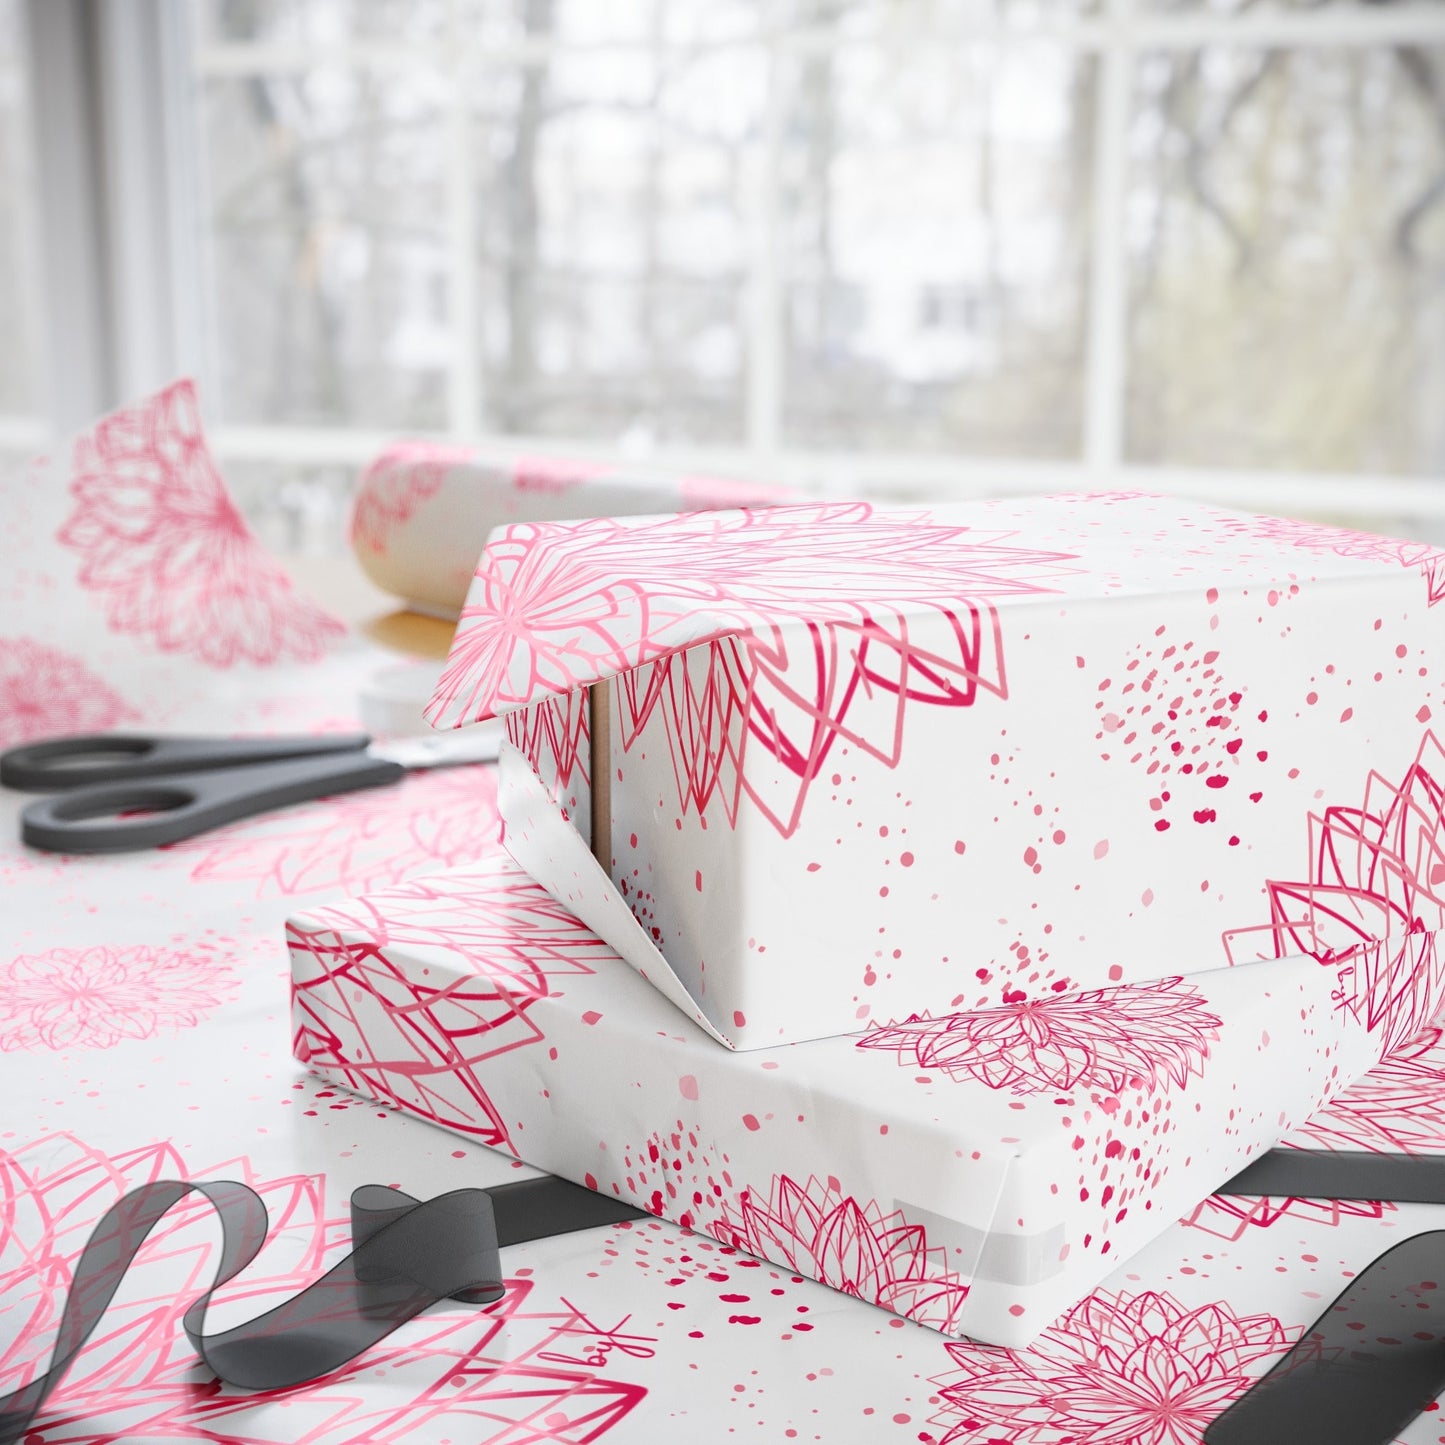 Designed byKath.com Pink and white floral Wrapping Paper in various sizes